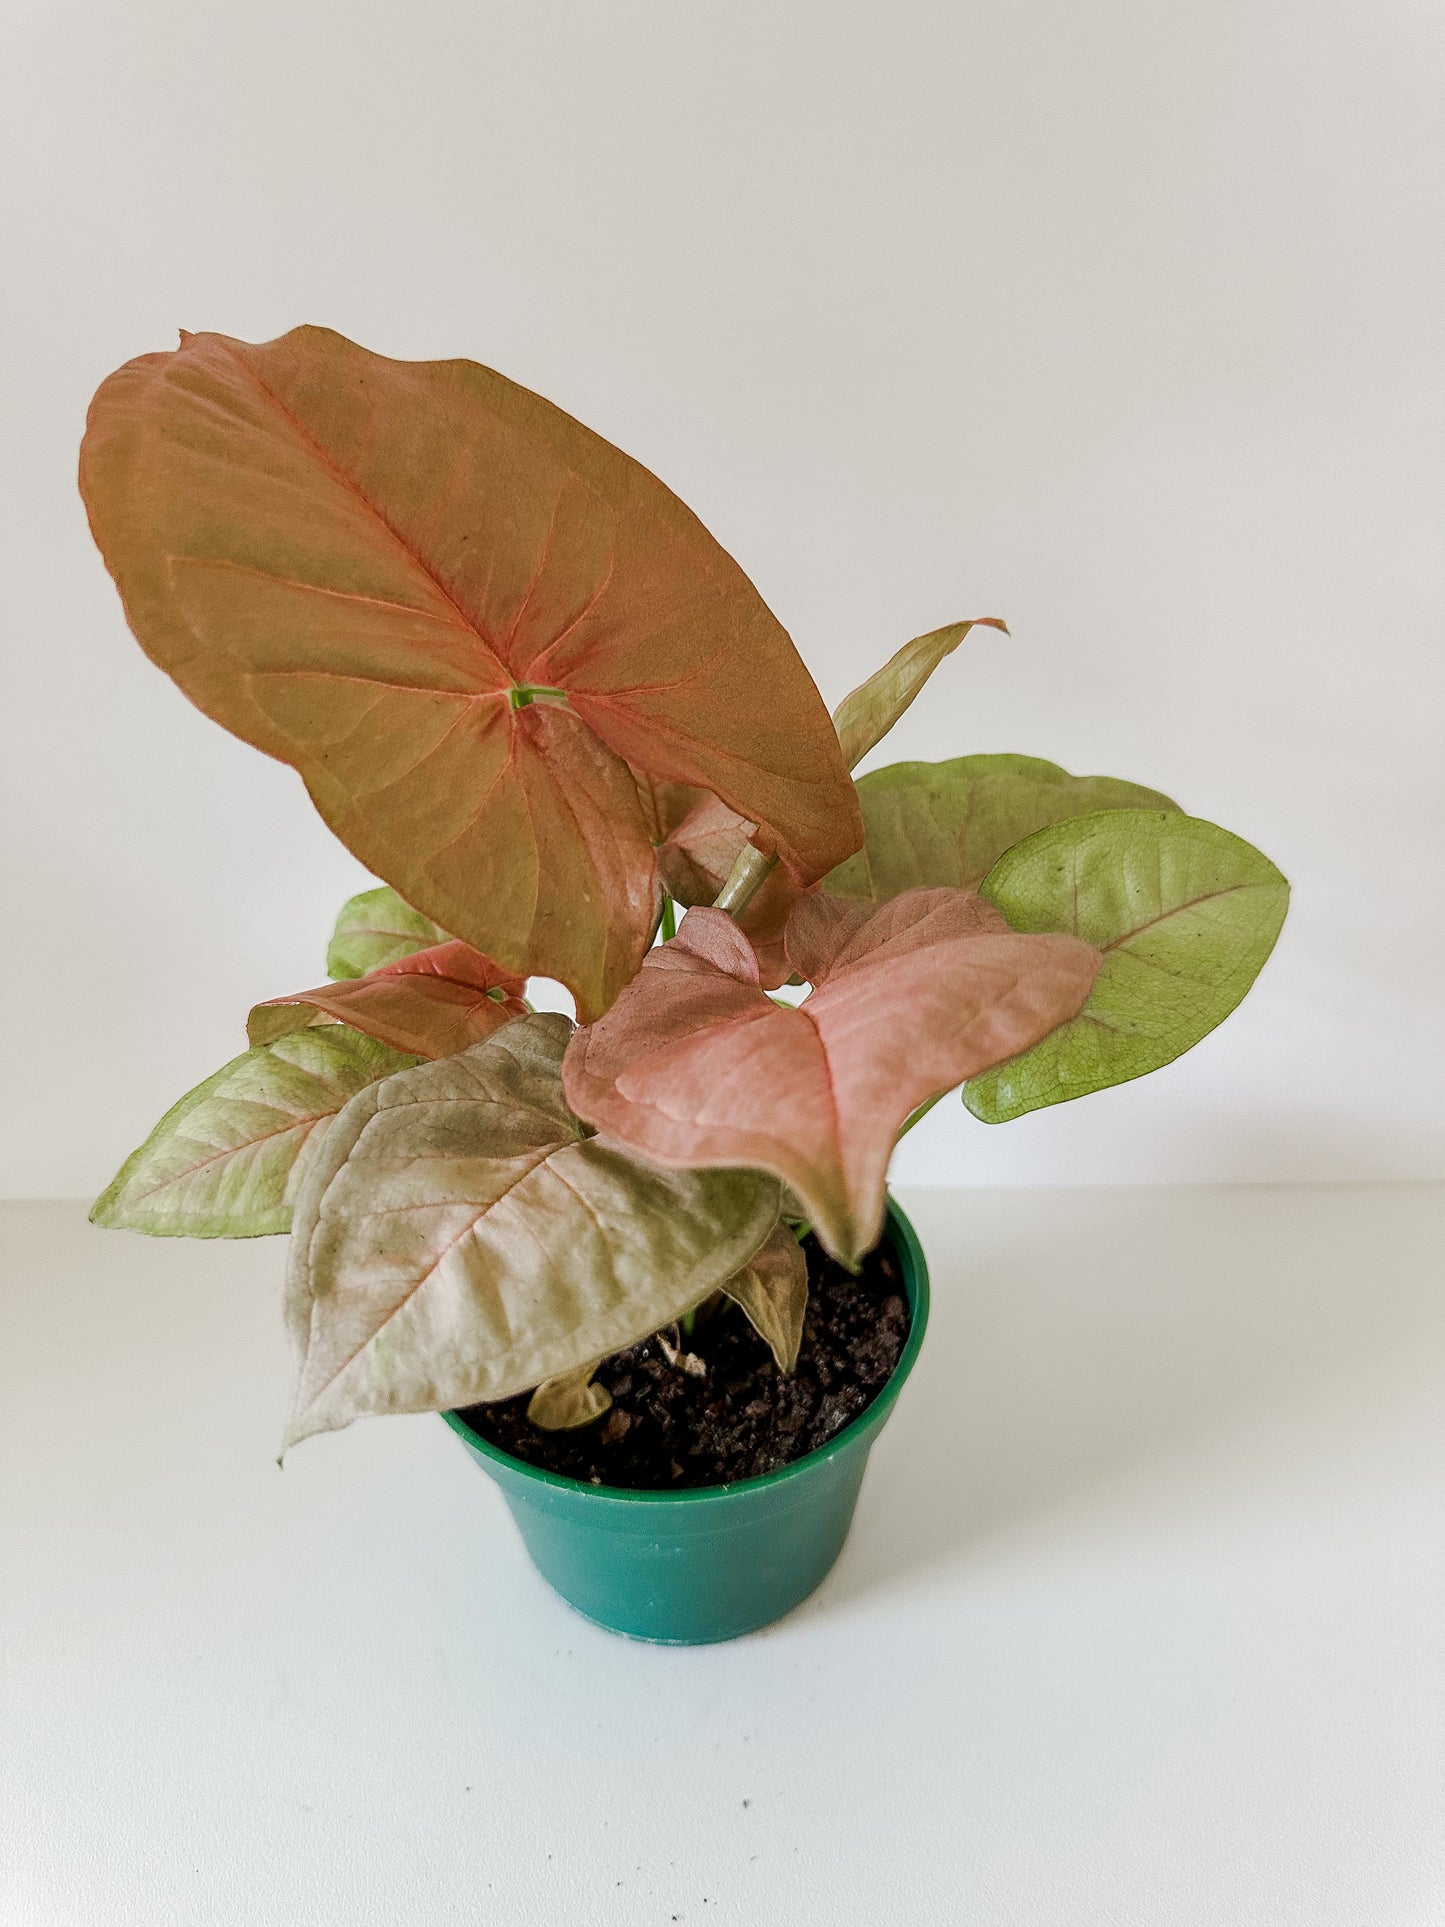 Syngonium Podophyllum 'Strawberry' - Large, Thin, Heart Shaped Strawberry Colored Leaves, Low Maintenance Tropical Houseplant- (3 Inch, 4 Inch or 6 Inch Nursery Pot)